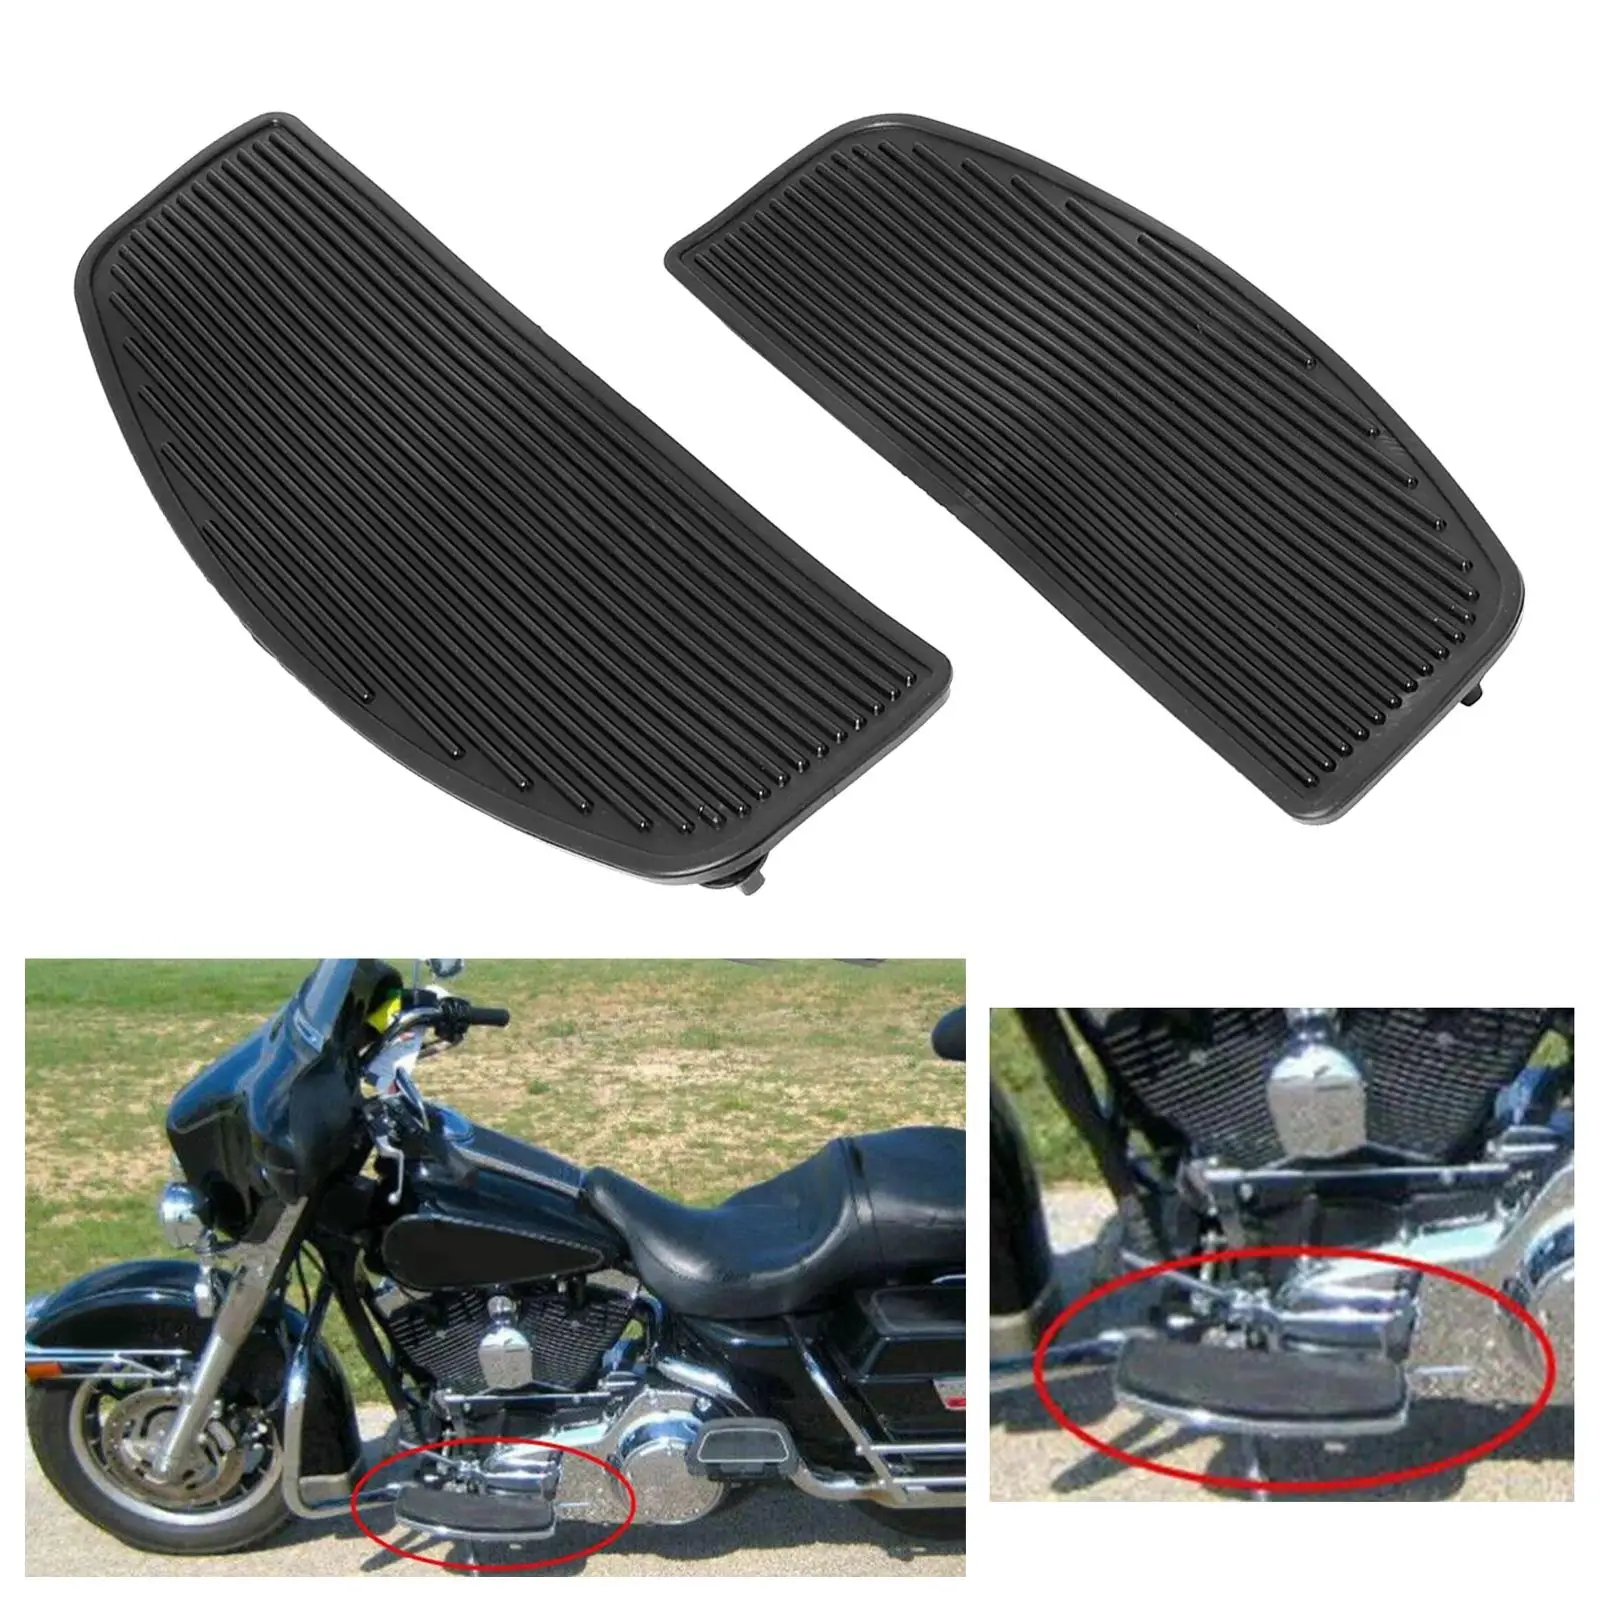 Motorcycle Pedals  Direct Replaces Footrest Pad High Performance Easy to Install Professional Durable Floorboards 